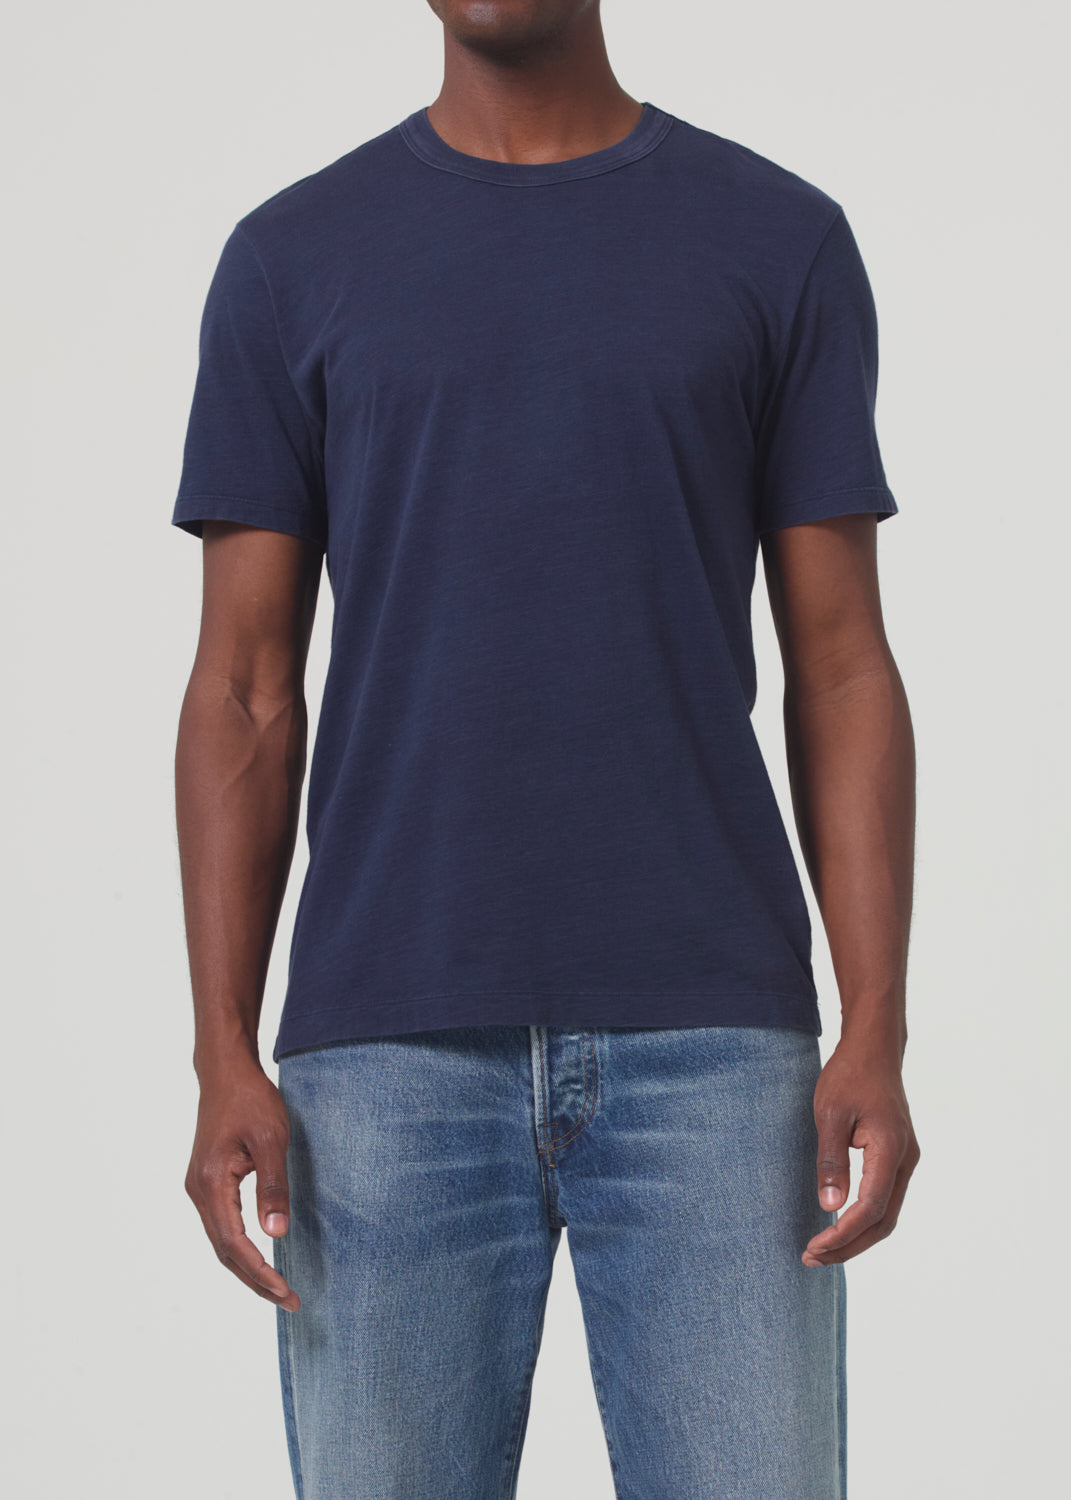 Everyday Short Sleeve Tee in Midnight front